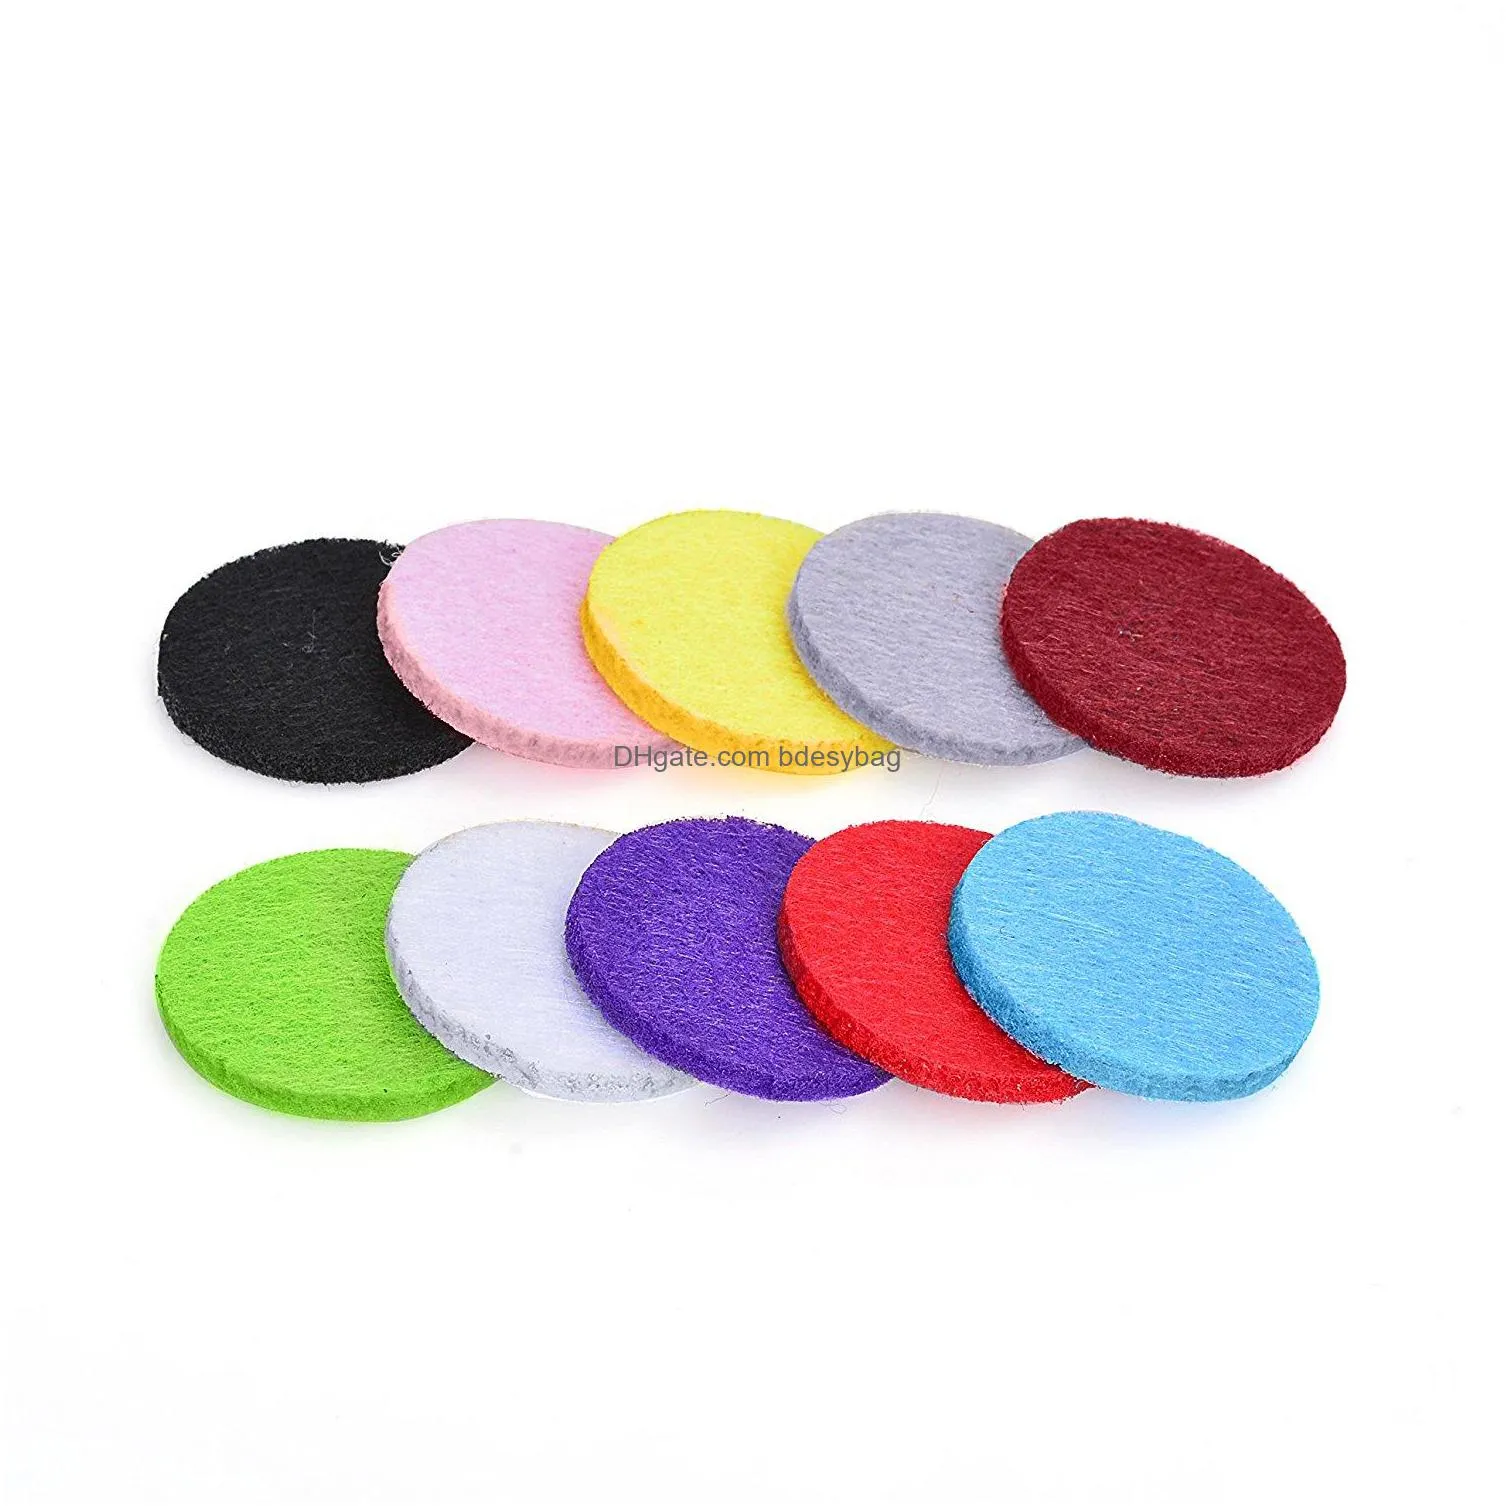 jewelry 100 pieces/bag advanced aromatherapy  oil diffuser pendant necklace/replacement pad color mix and match